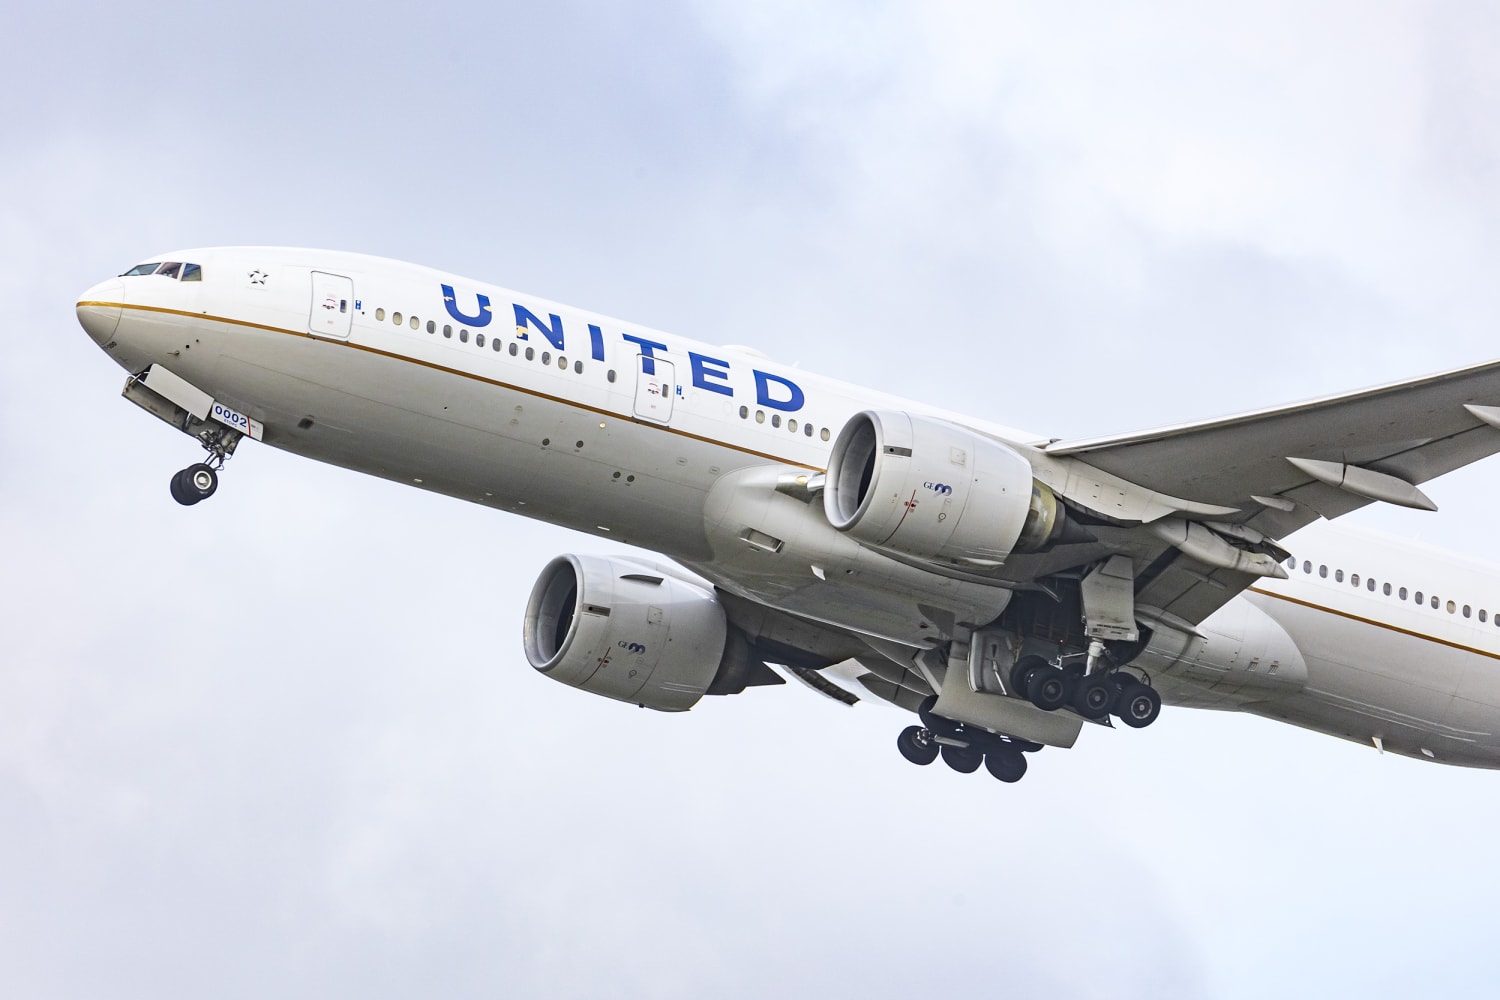 United Airlines aims to avoid flight disruptions ahead of US Fourth of July travel